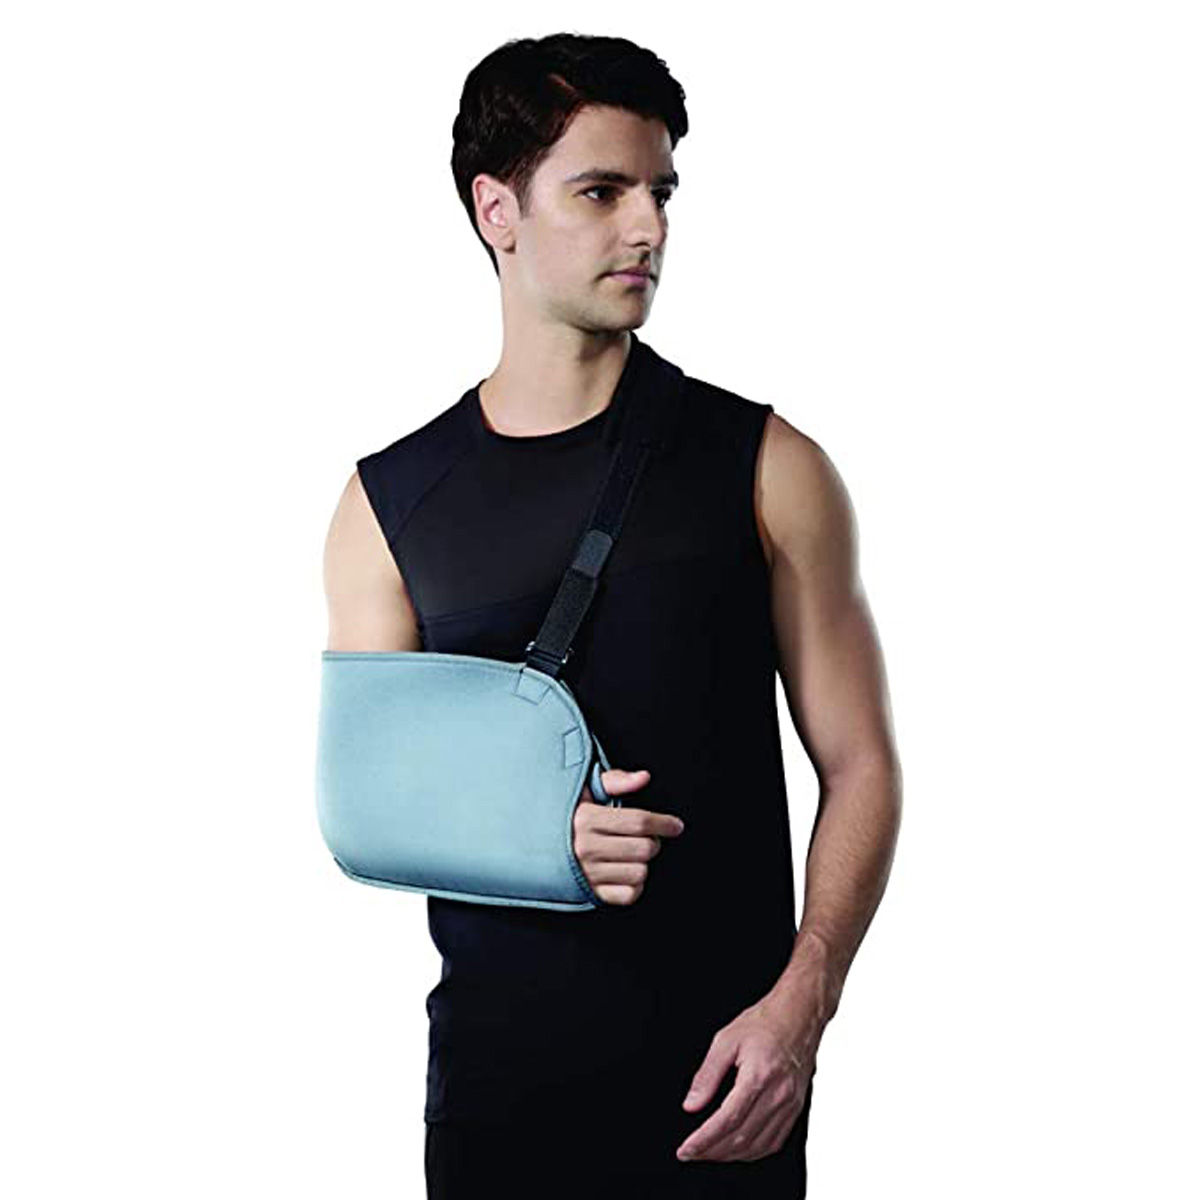 Buy Visco Pouch Arm Sling Small, 1 Count Online